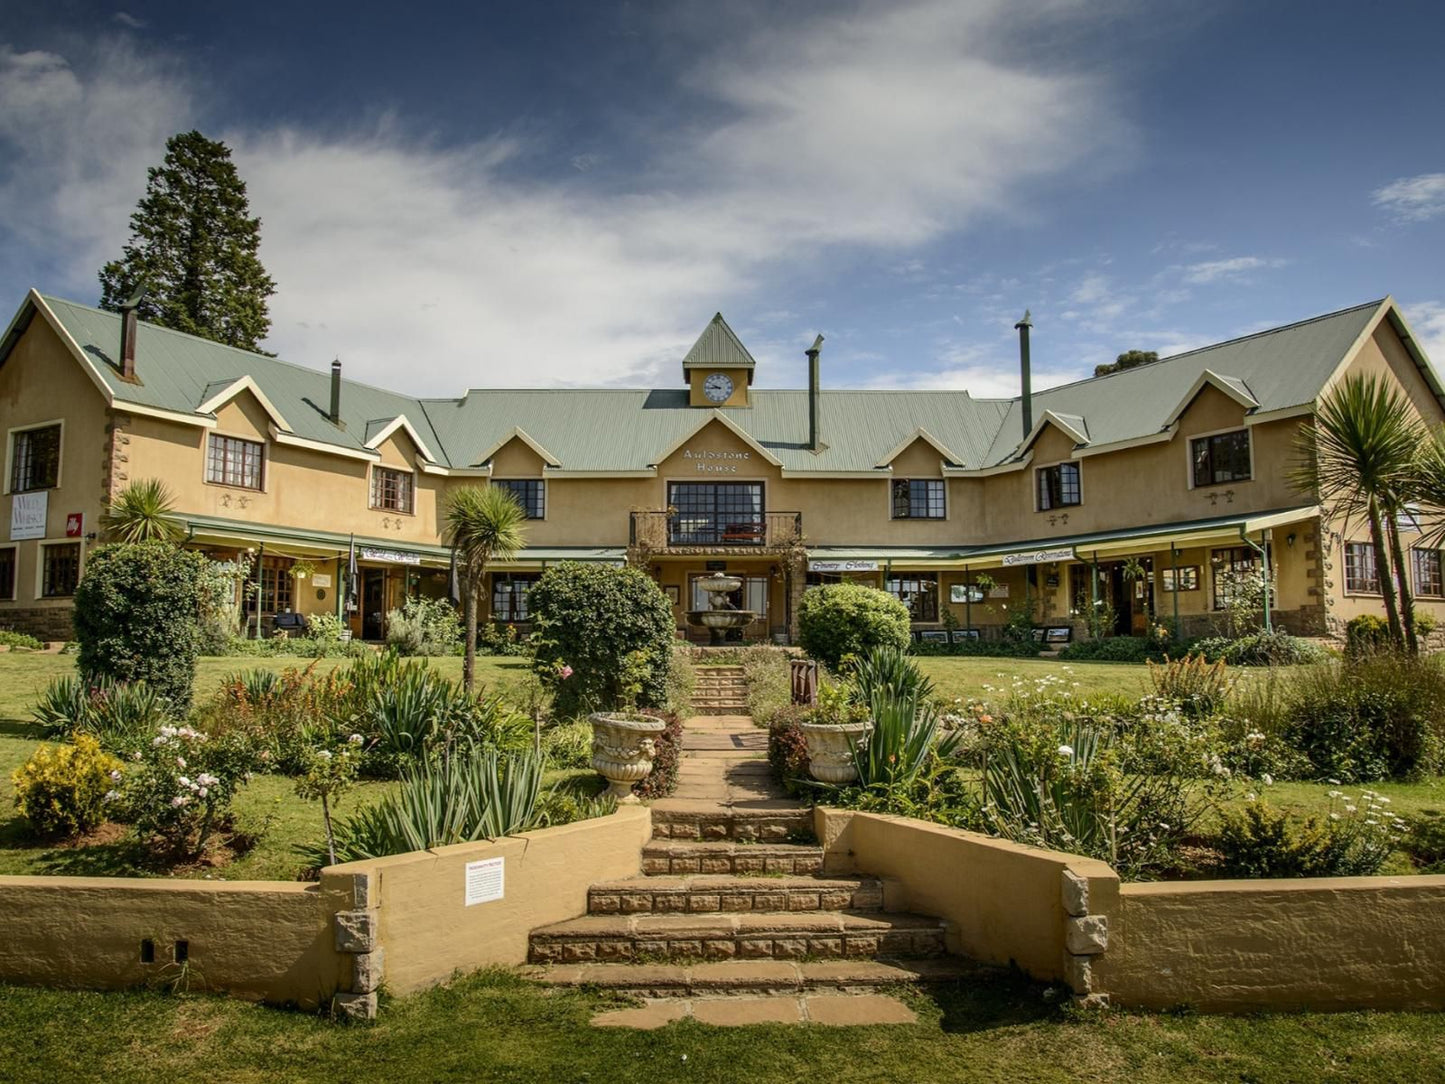 Auldstone House Dullstroom Mpumalanga South Africa House, Building, Architecture